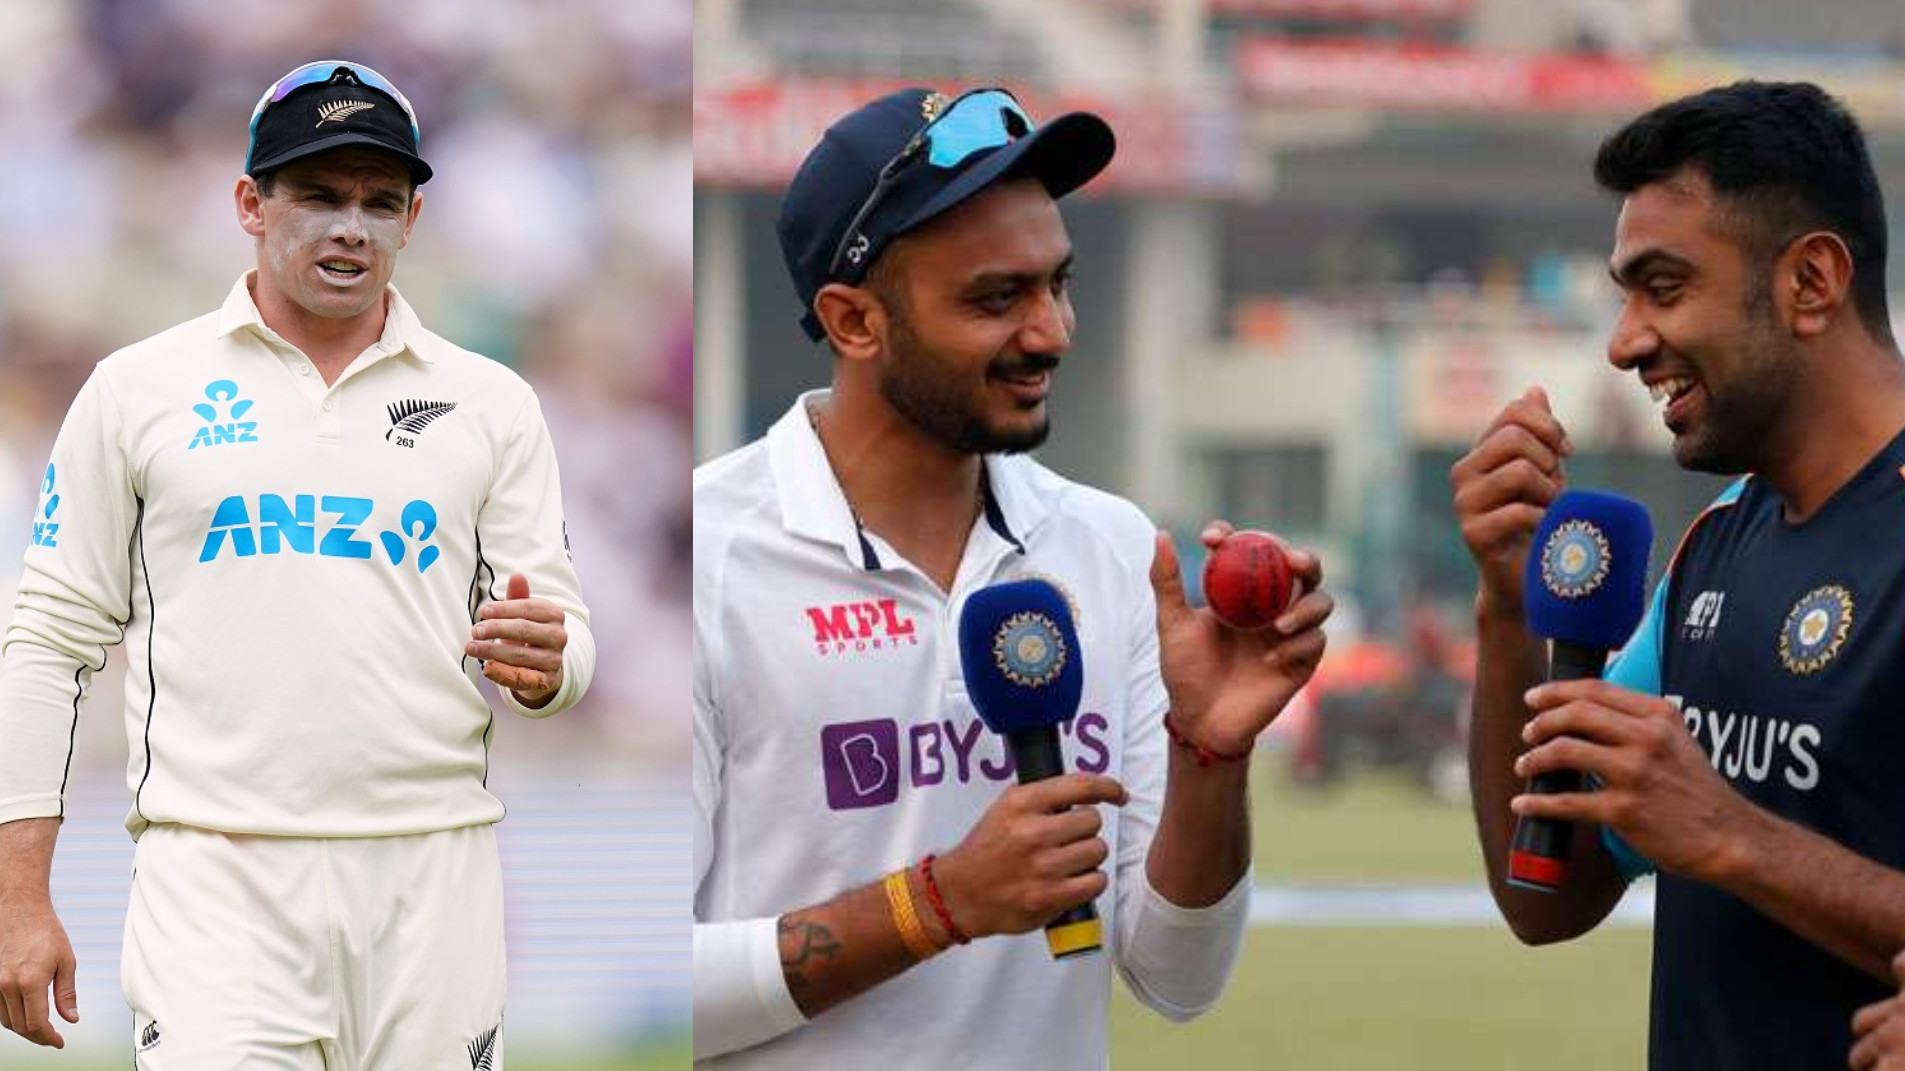 IND v NZ 2021: NZ’s Tom Latham lauds Indian bowlers as very good and accurate after Mumbai Test loss